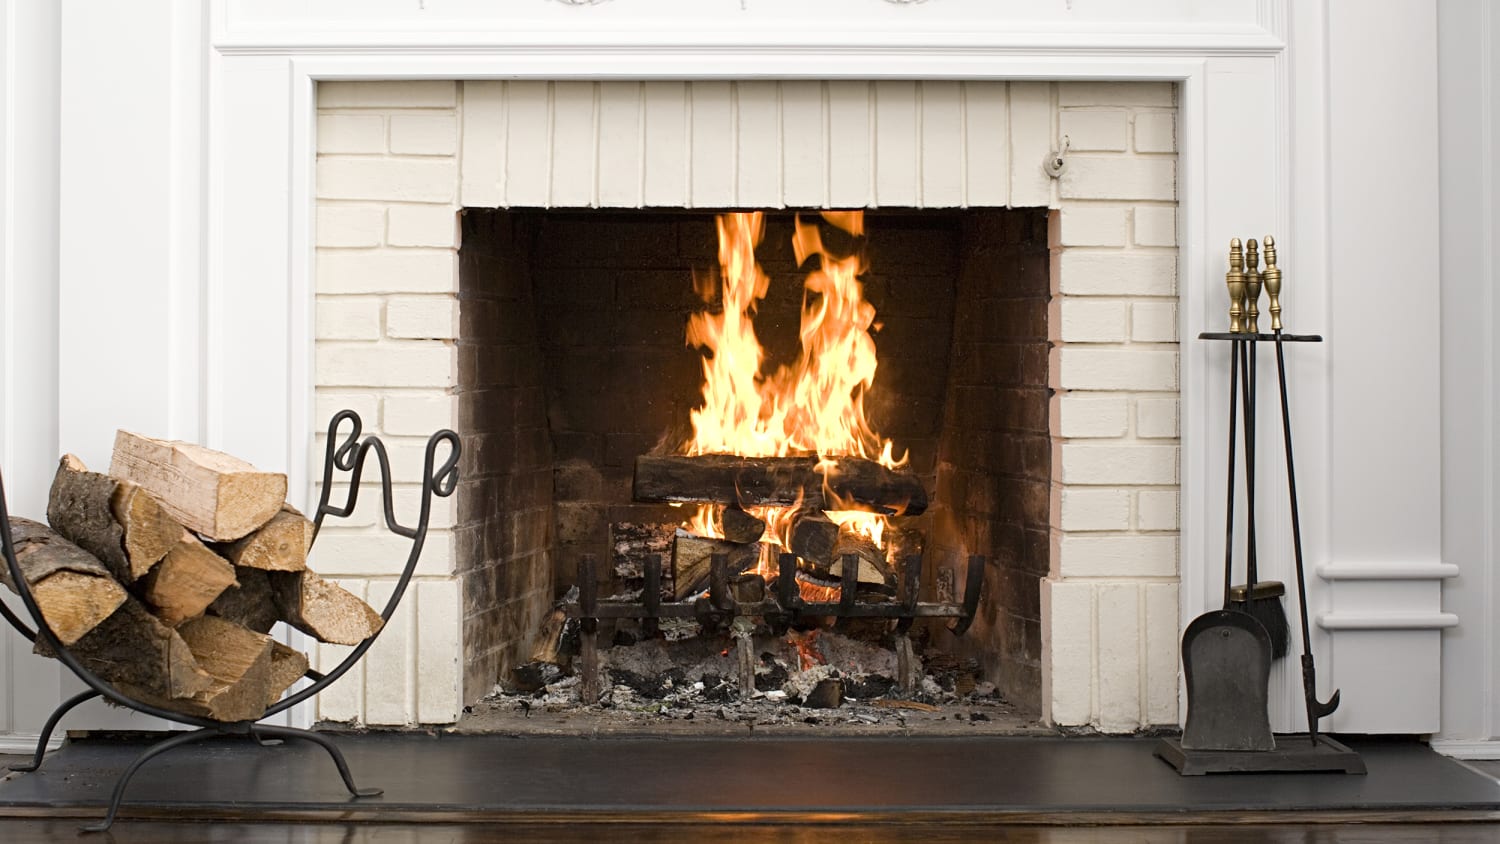 Everything you need to know about chimney and fireplace cleaning